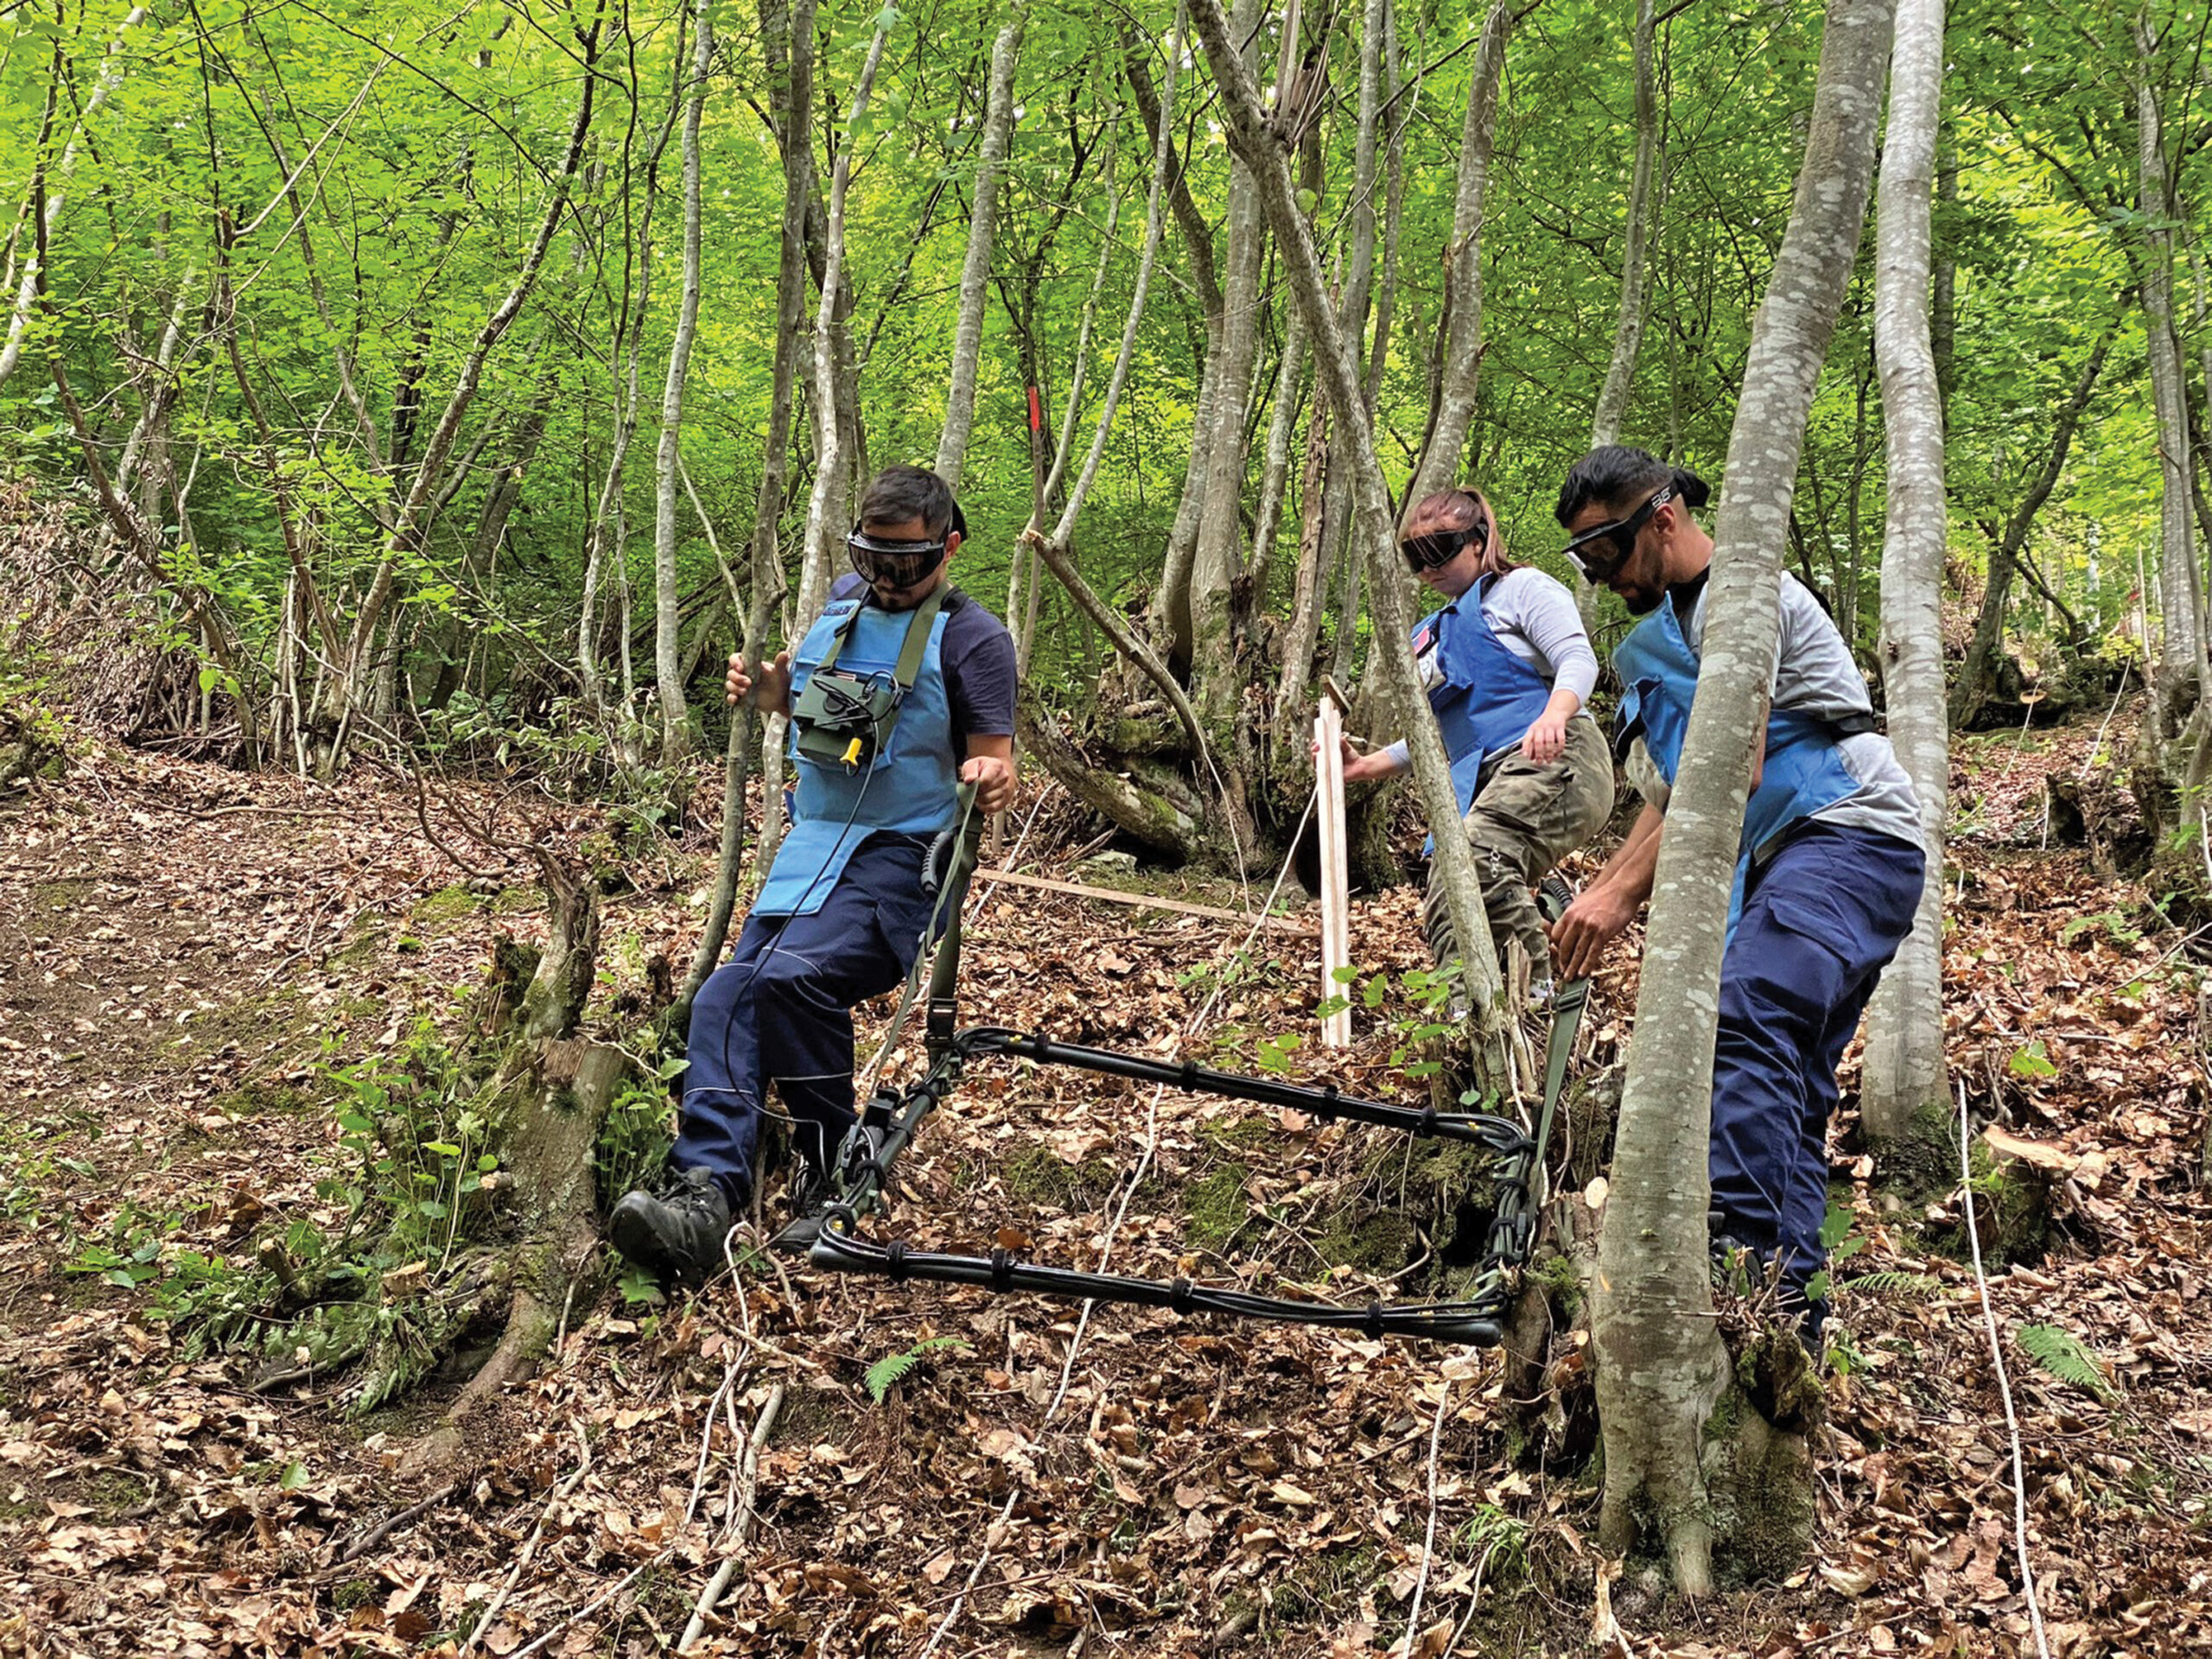 Three people in protective hear carry a large loop slightly above the ground through wooded land